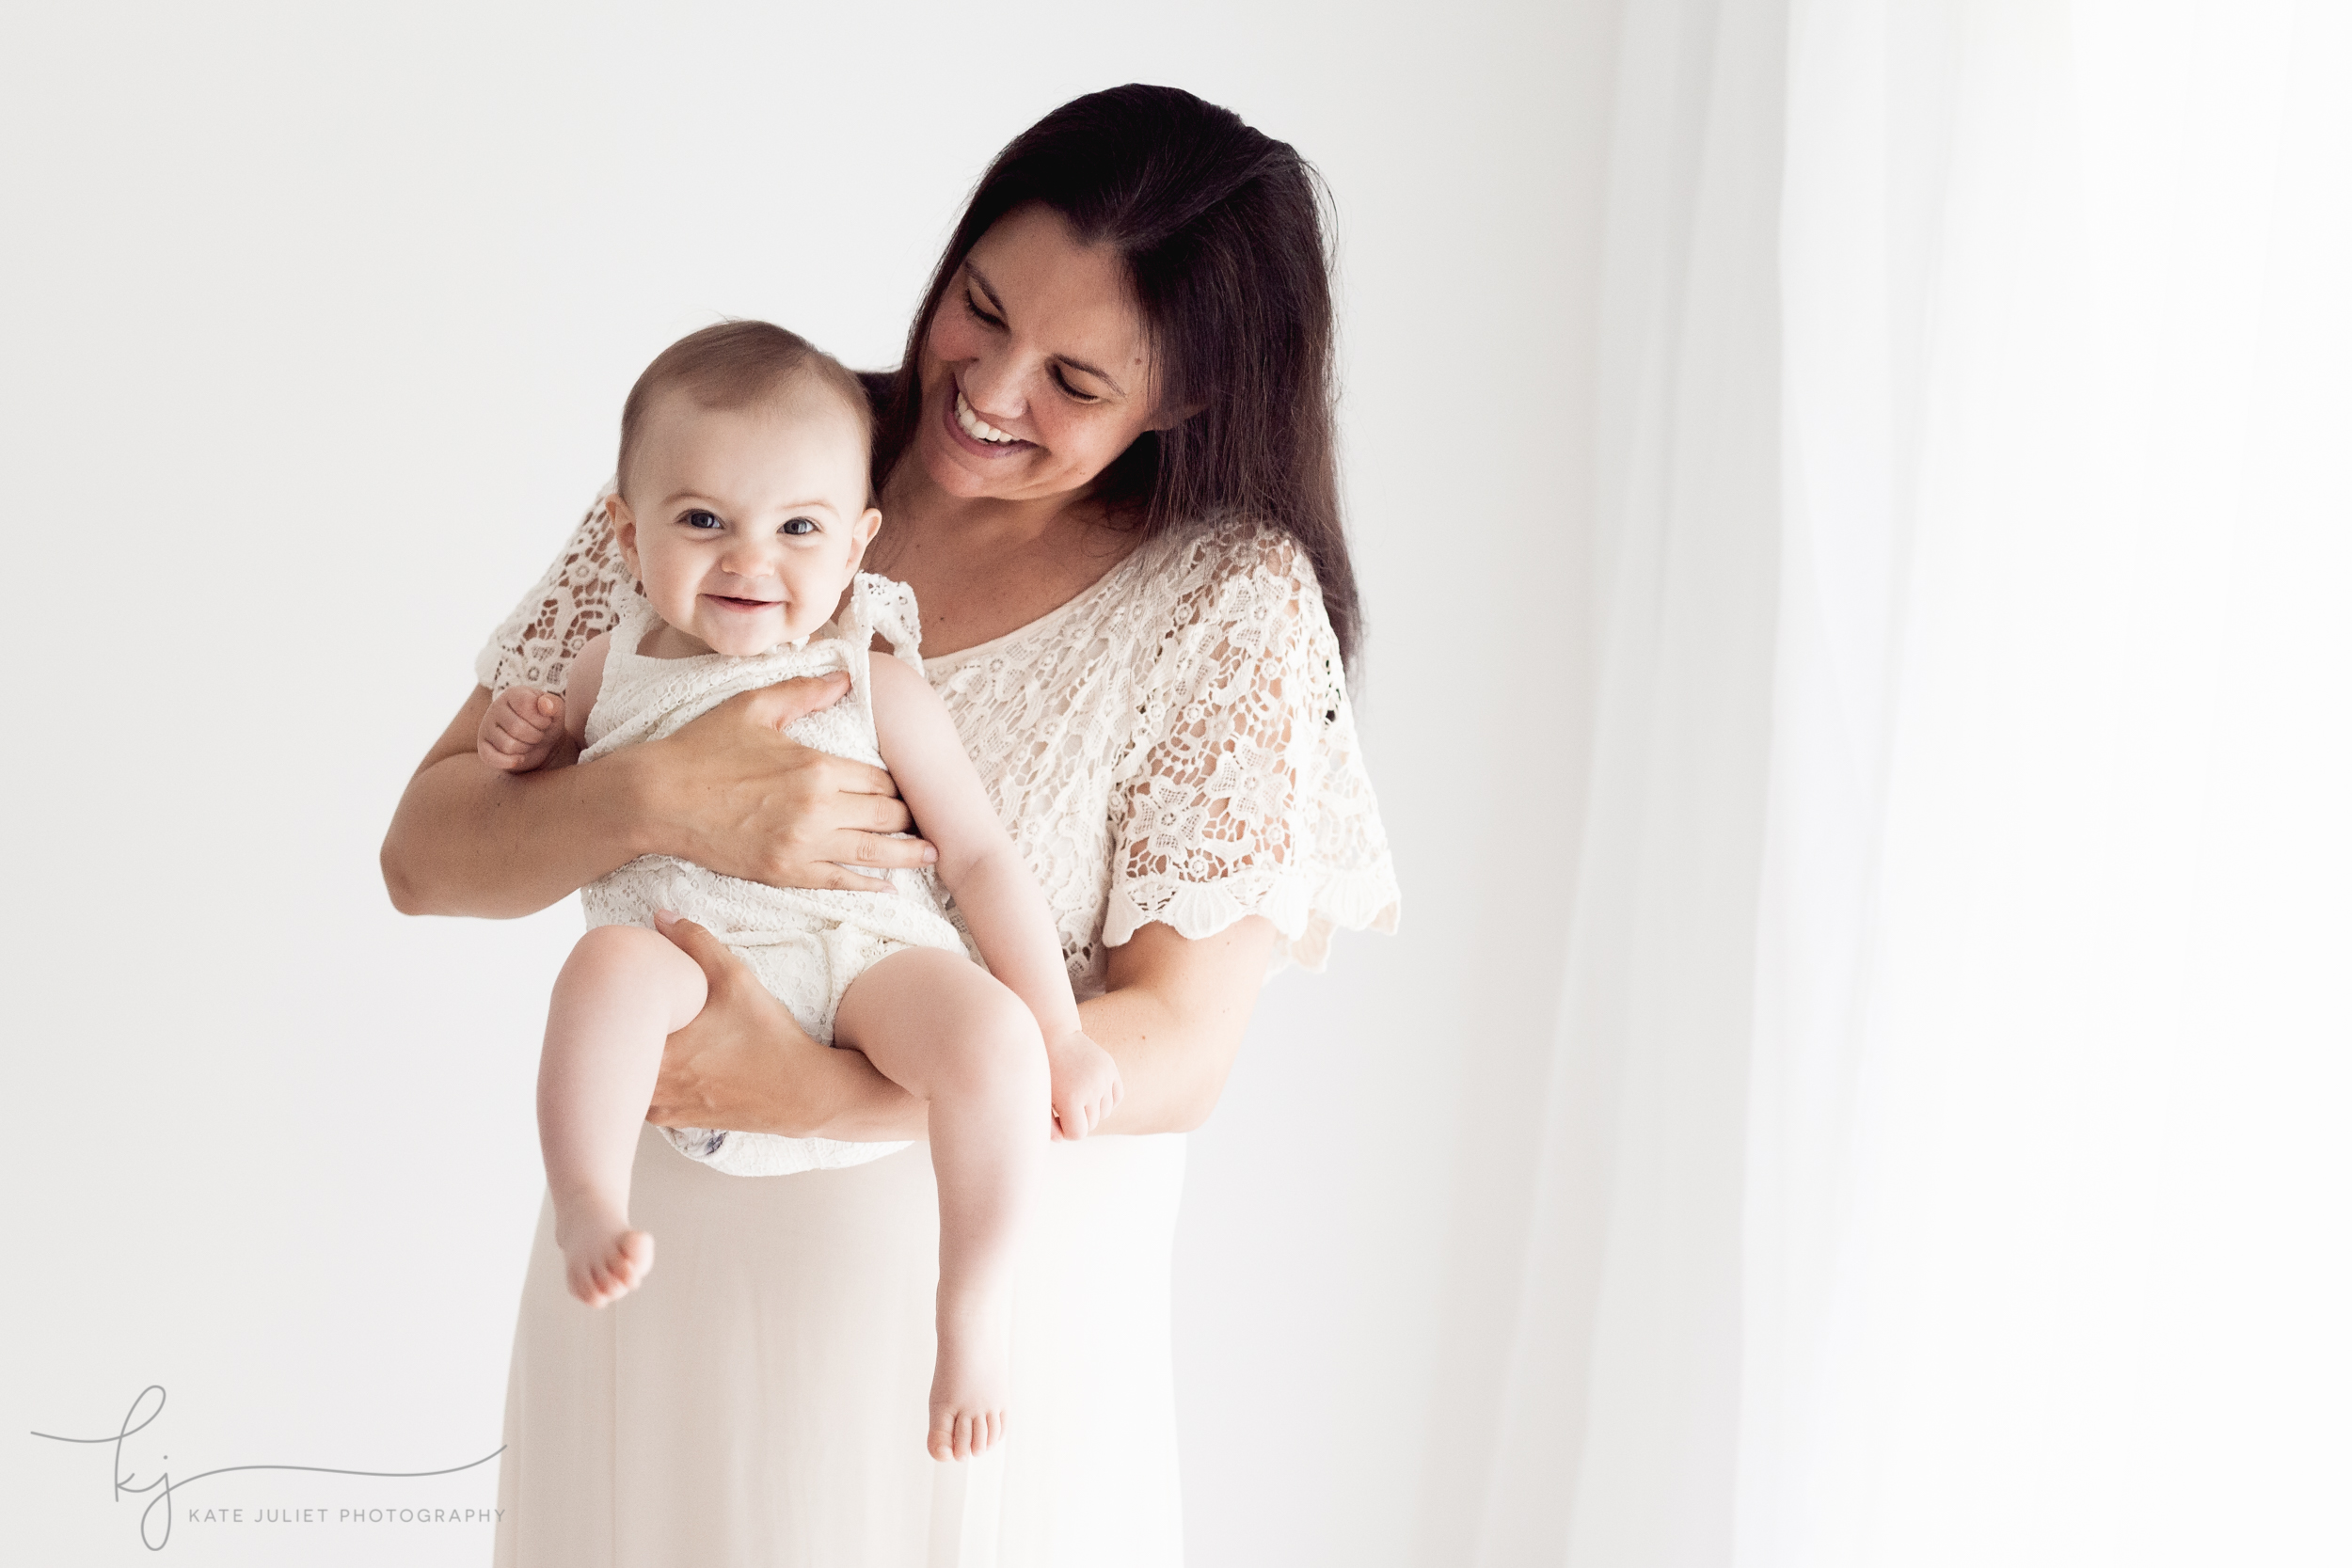 Washington DC Mother and Baby Photographer | Kate Juliet Photography